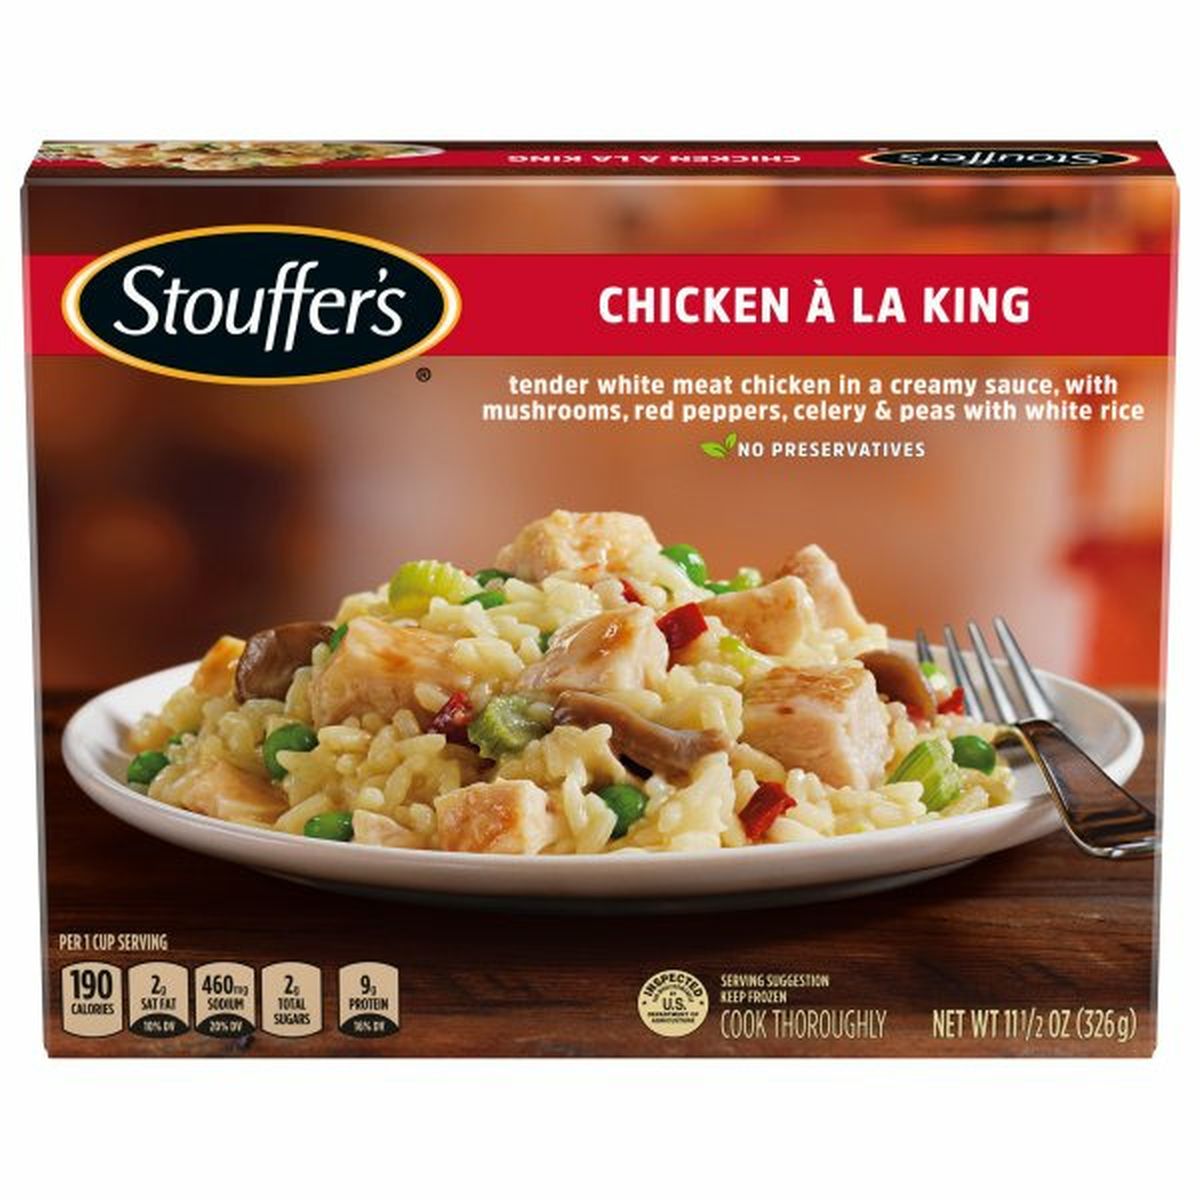 Calories in Stouffer's Chicken A La King